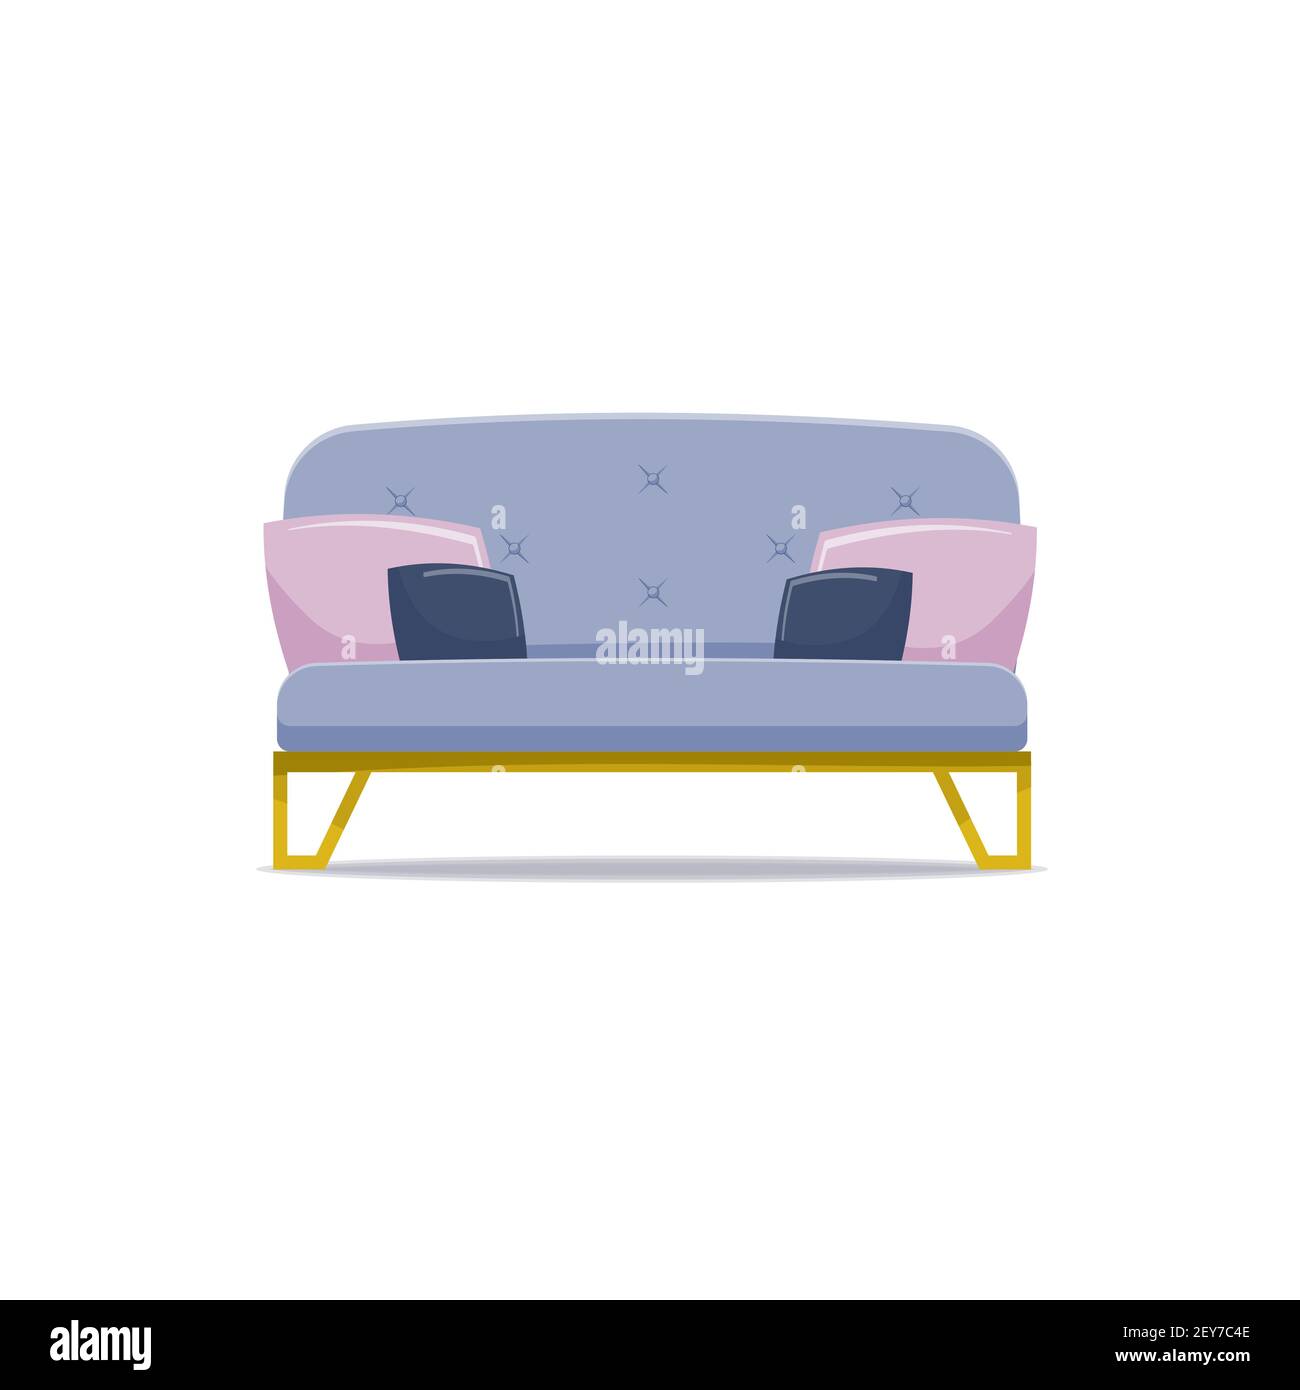 Sofa vector illustration isolated on white background. Stock Vector